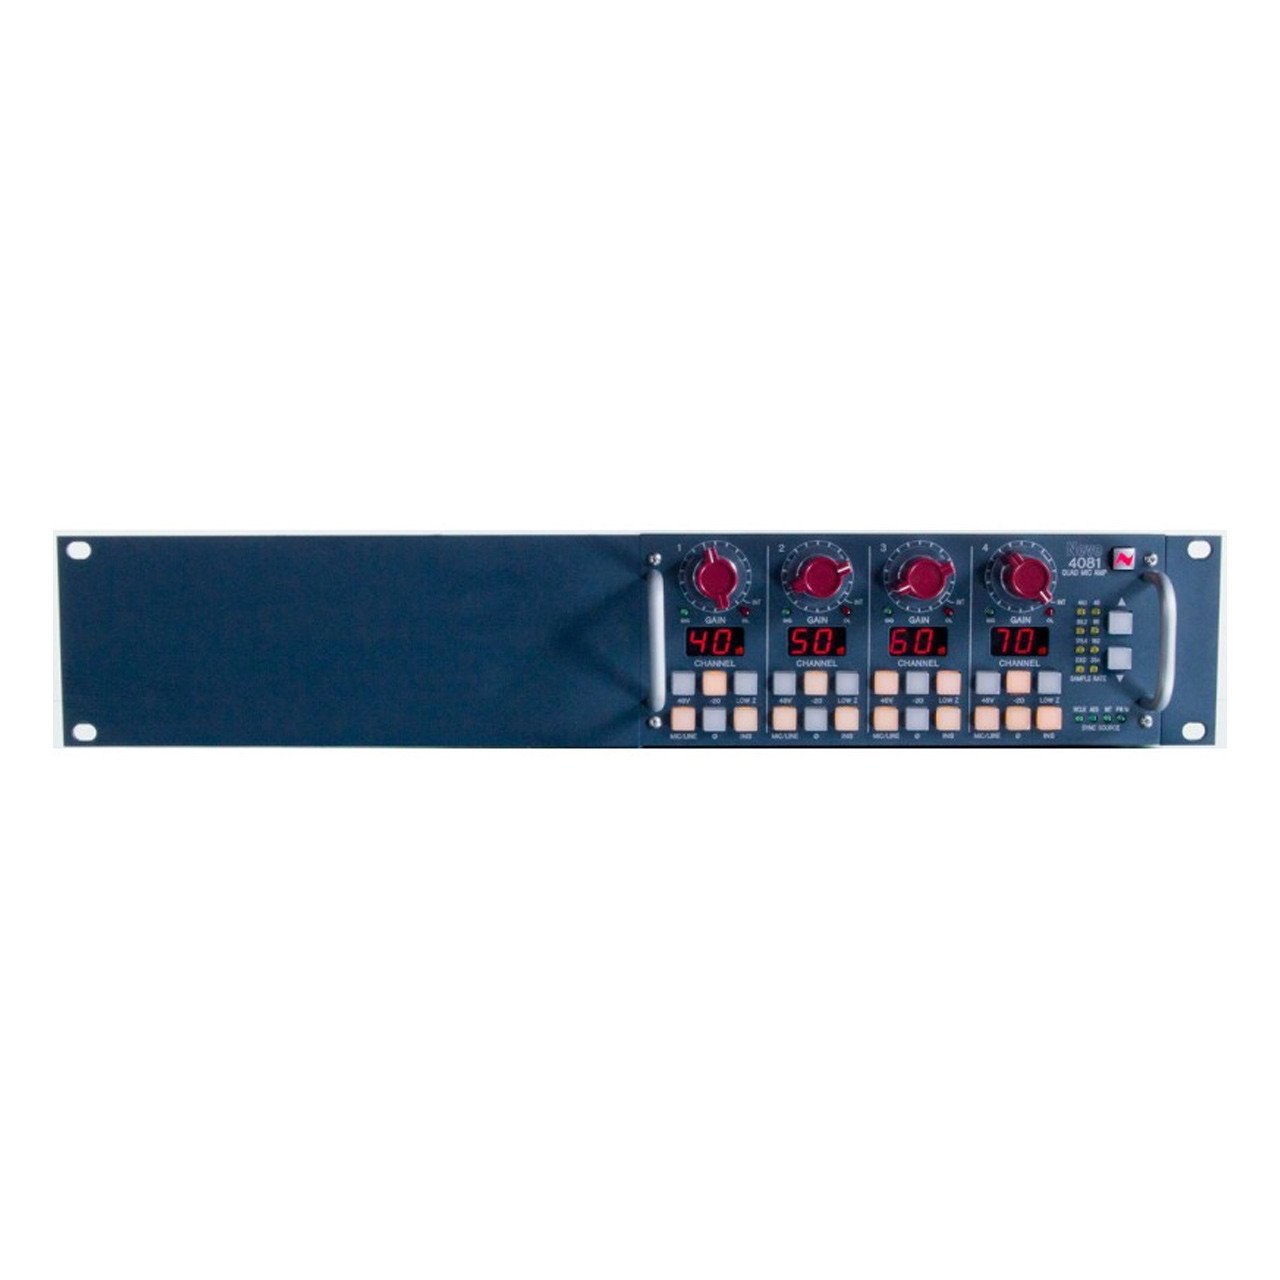 Outboard Accessories - Neve AMS 4081 Rackmount Kit